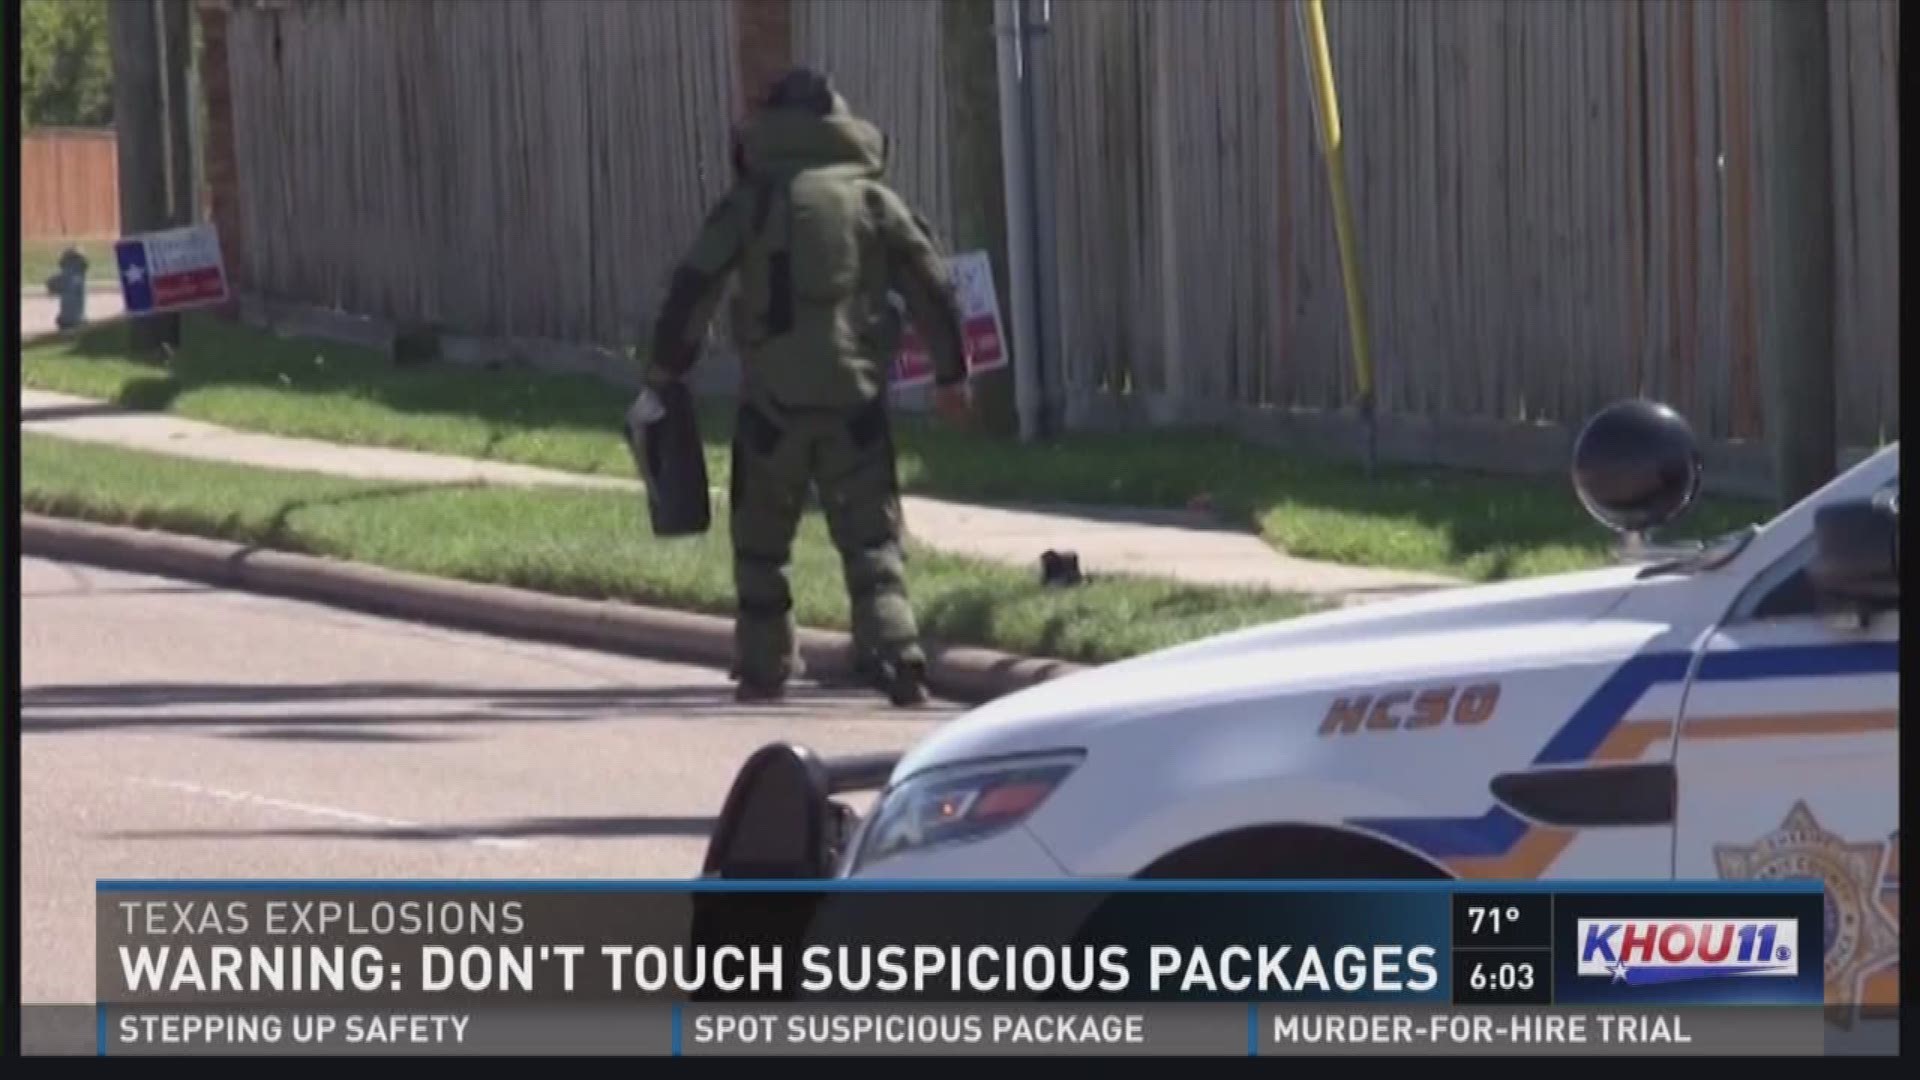 The Houston area saw multiple reports of suspicious packages Tuesday, though none of them were found to contain explosive devices.